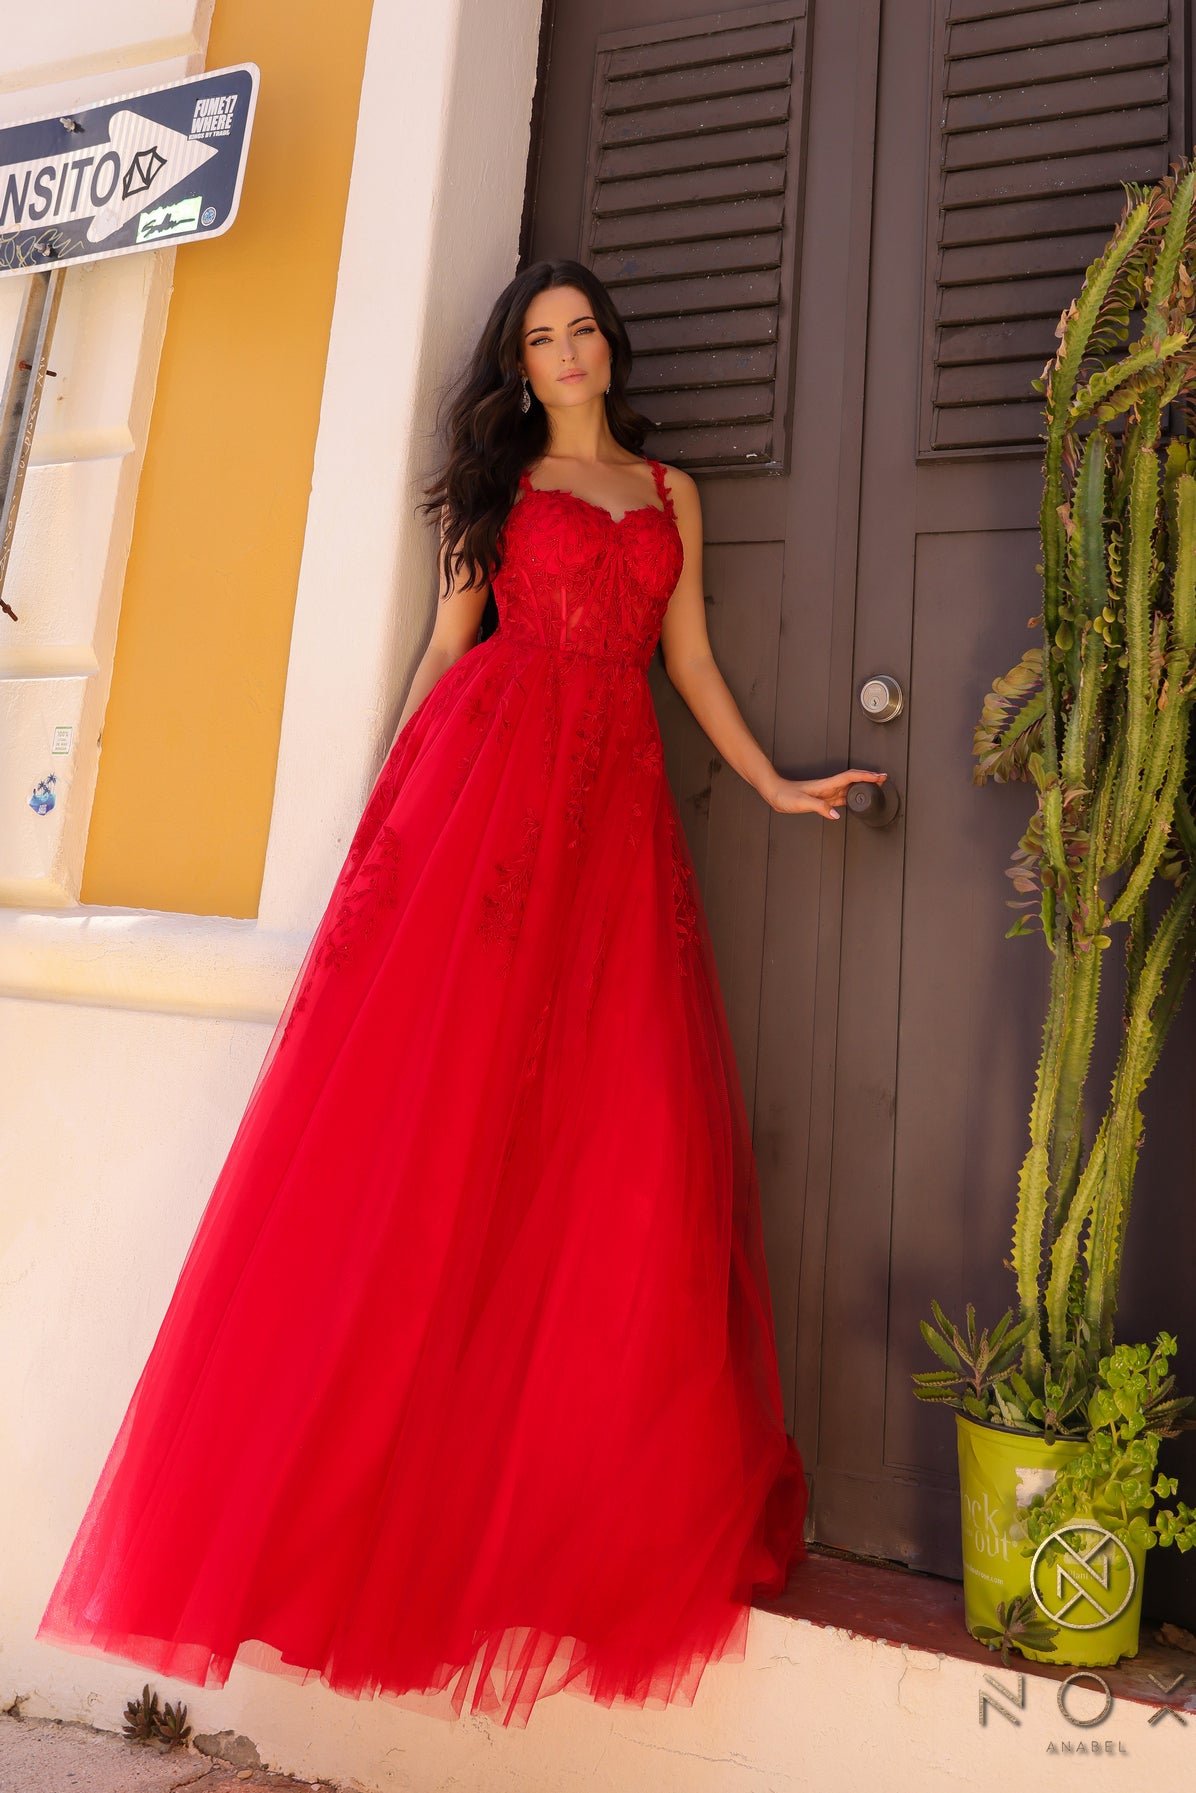 Nox Anabel -T1082 Sweetheart Neck Corset Prom Gown